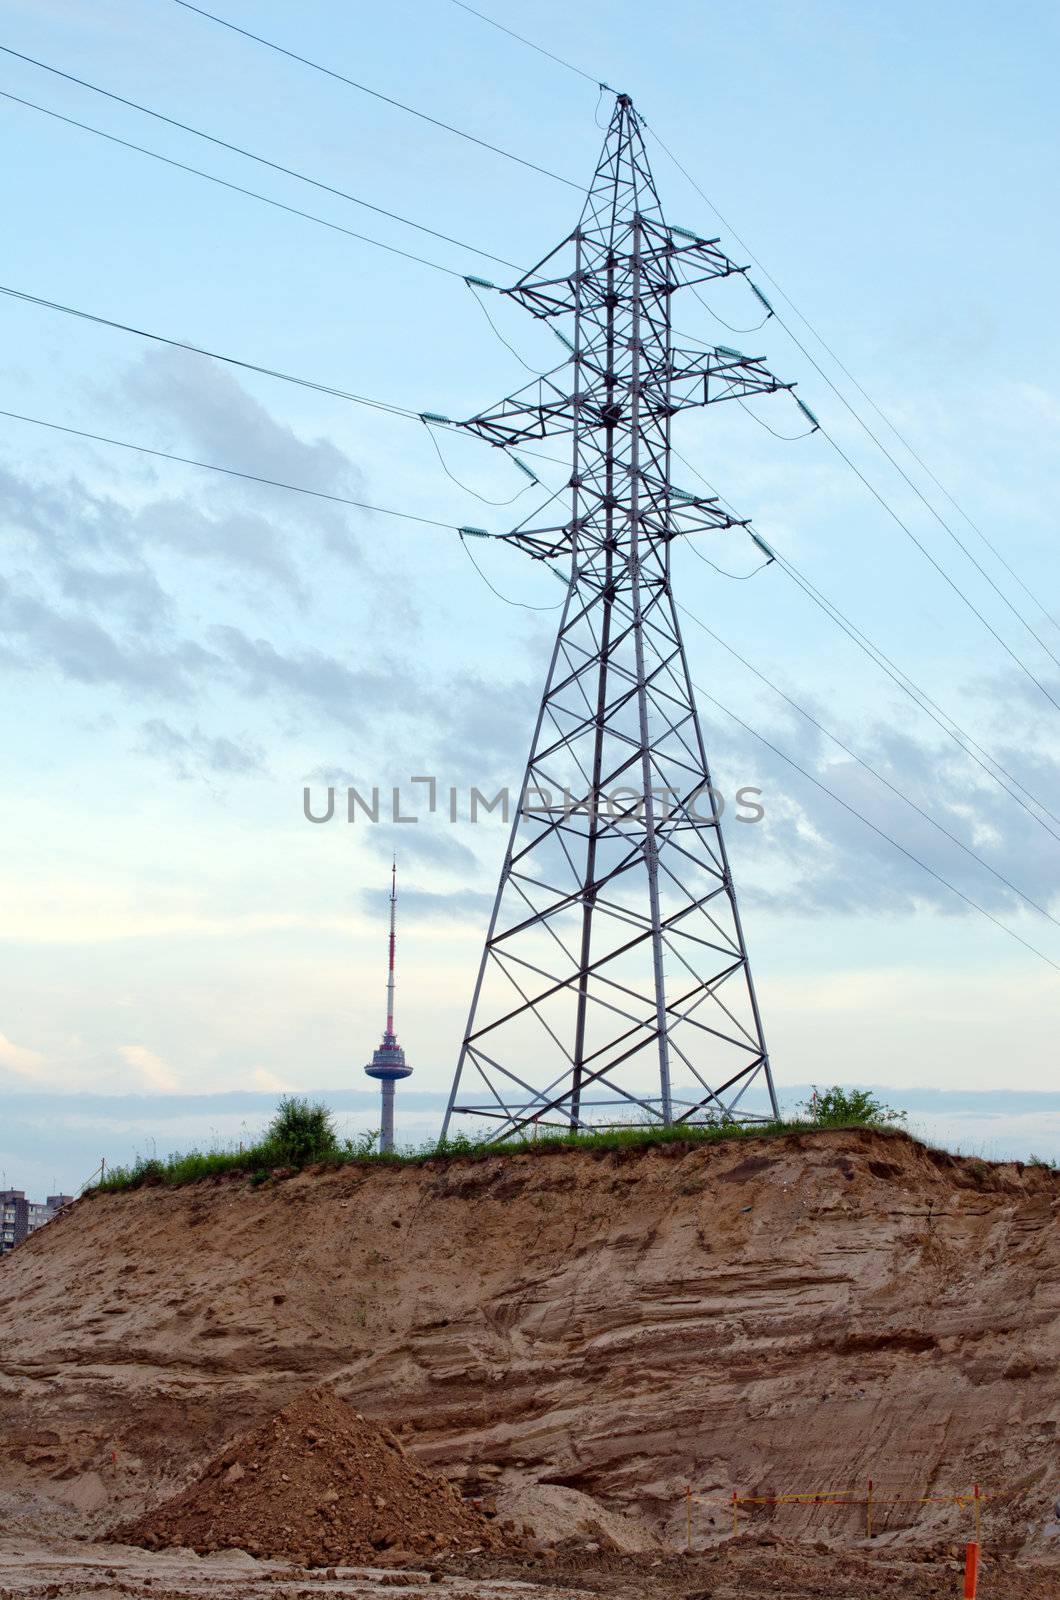 High-voltage power poles and wires on sand hill and television tower in distance.